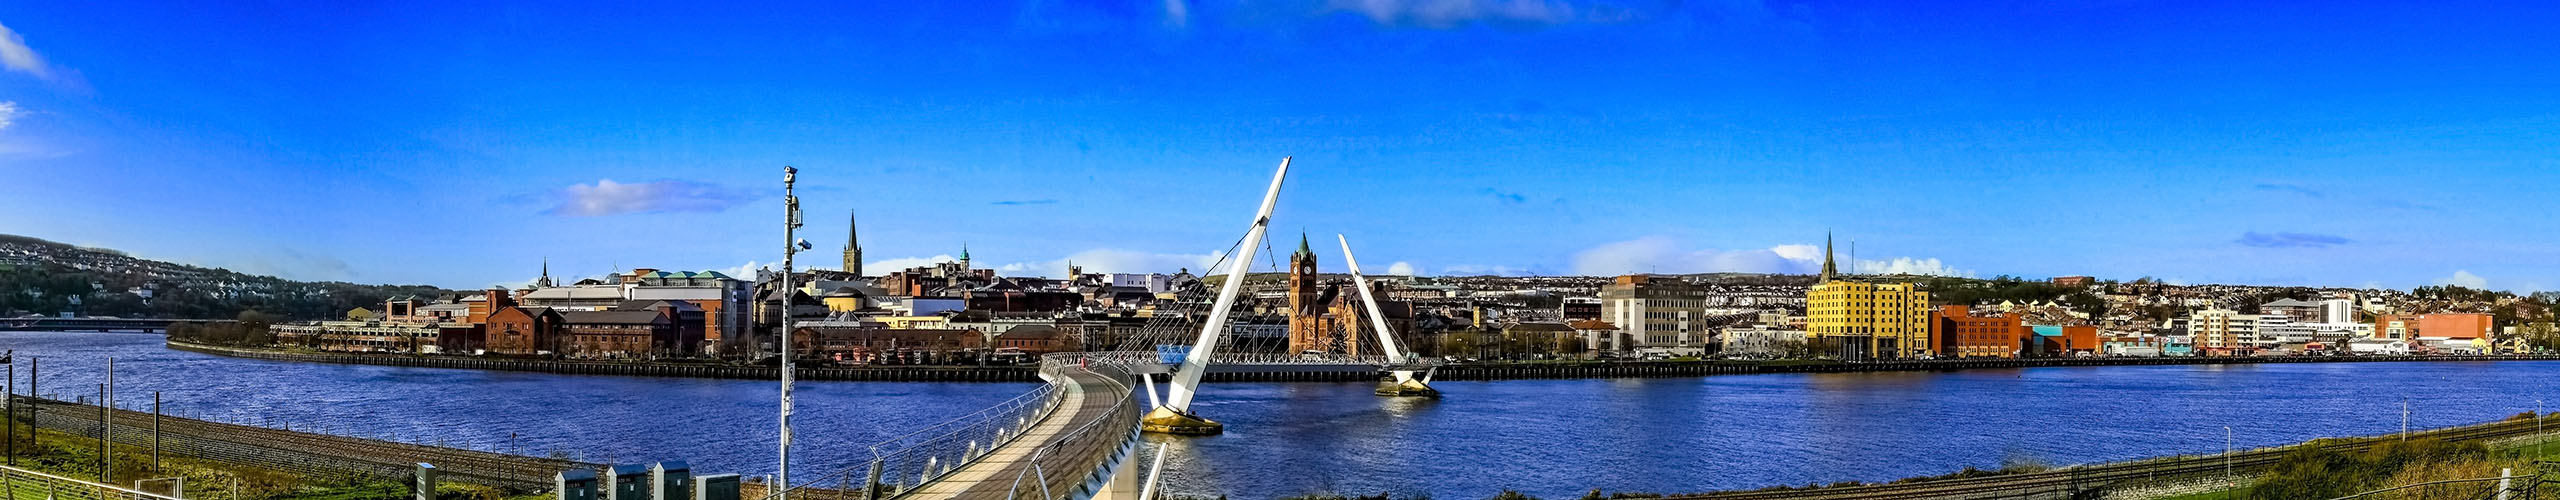 a picture from Ebrington towards the city side showing the river foyle, peace bridge, the city skyline and a blue sky